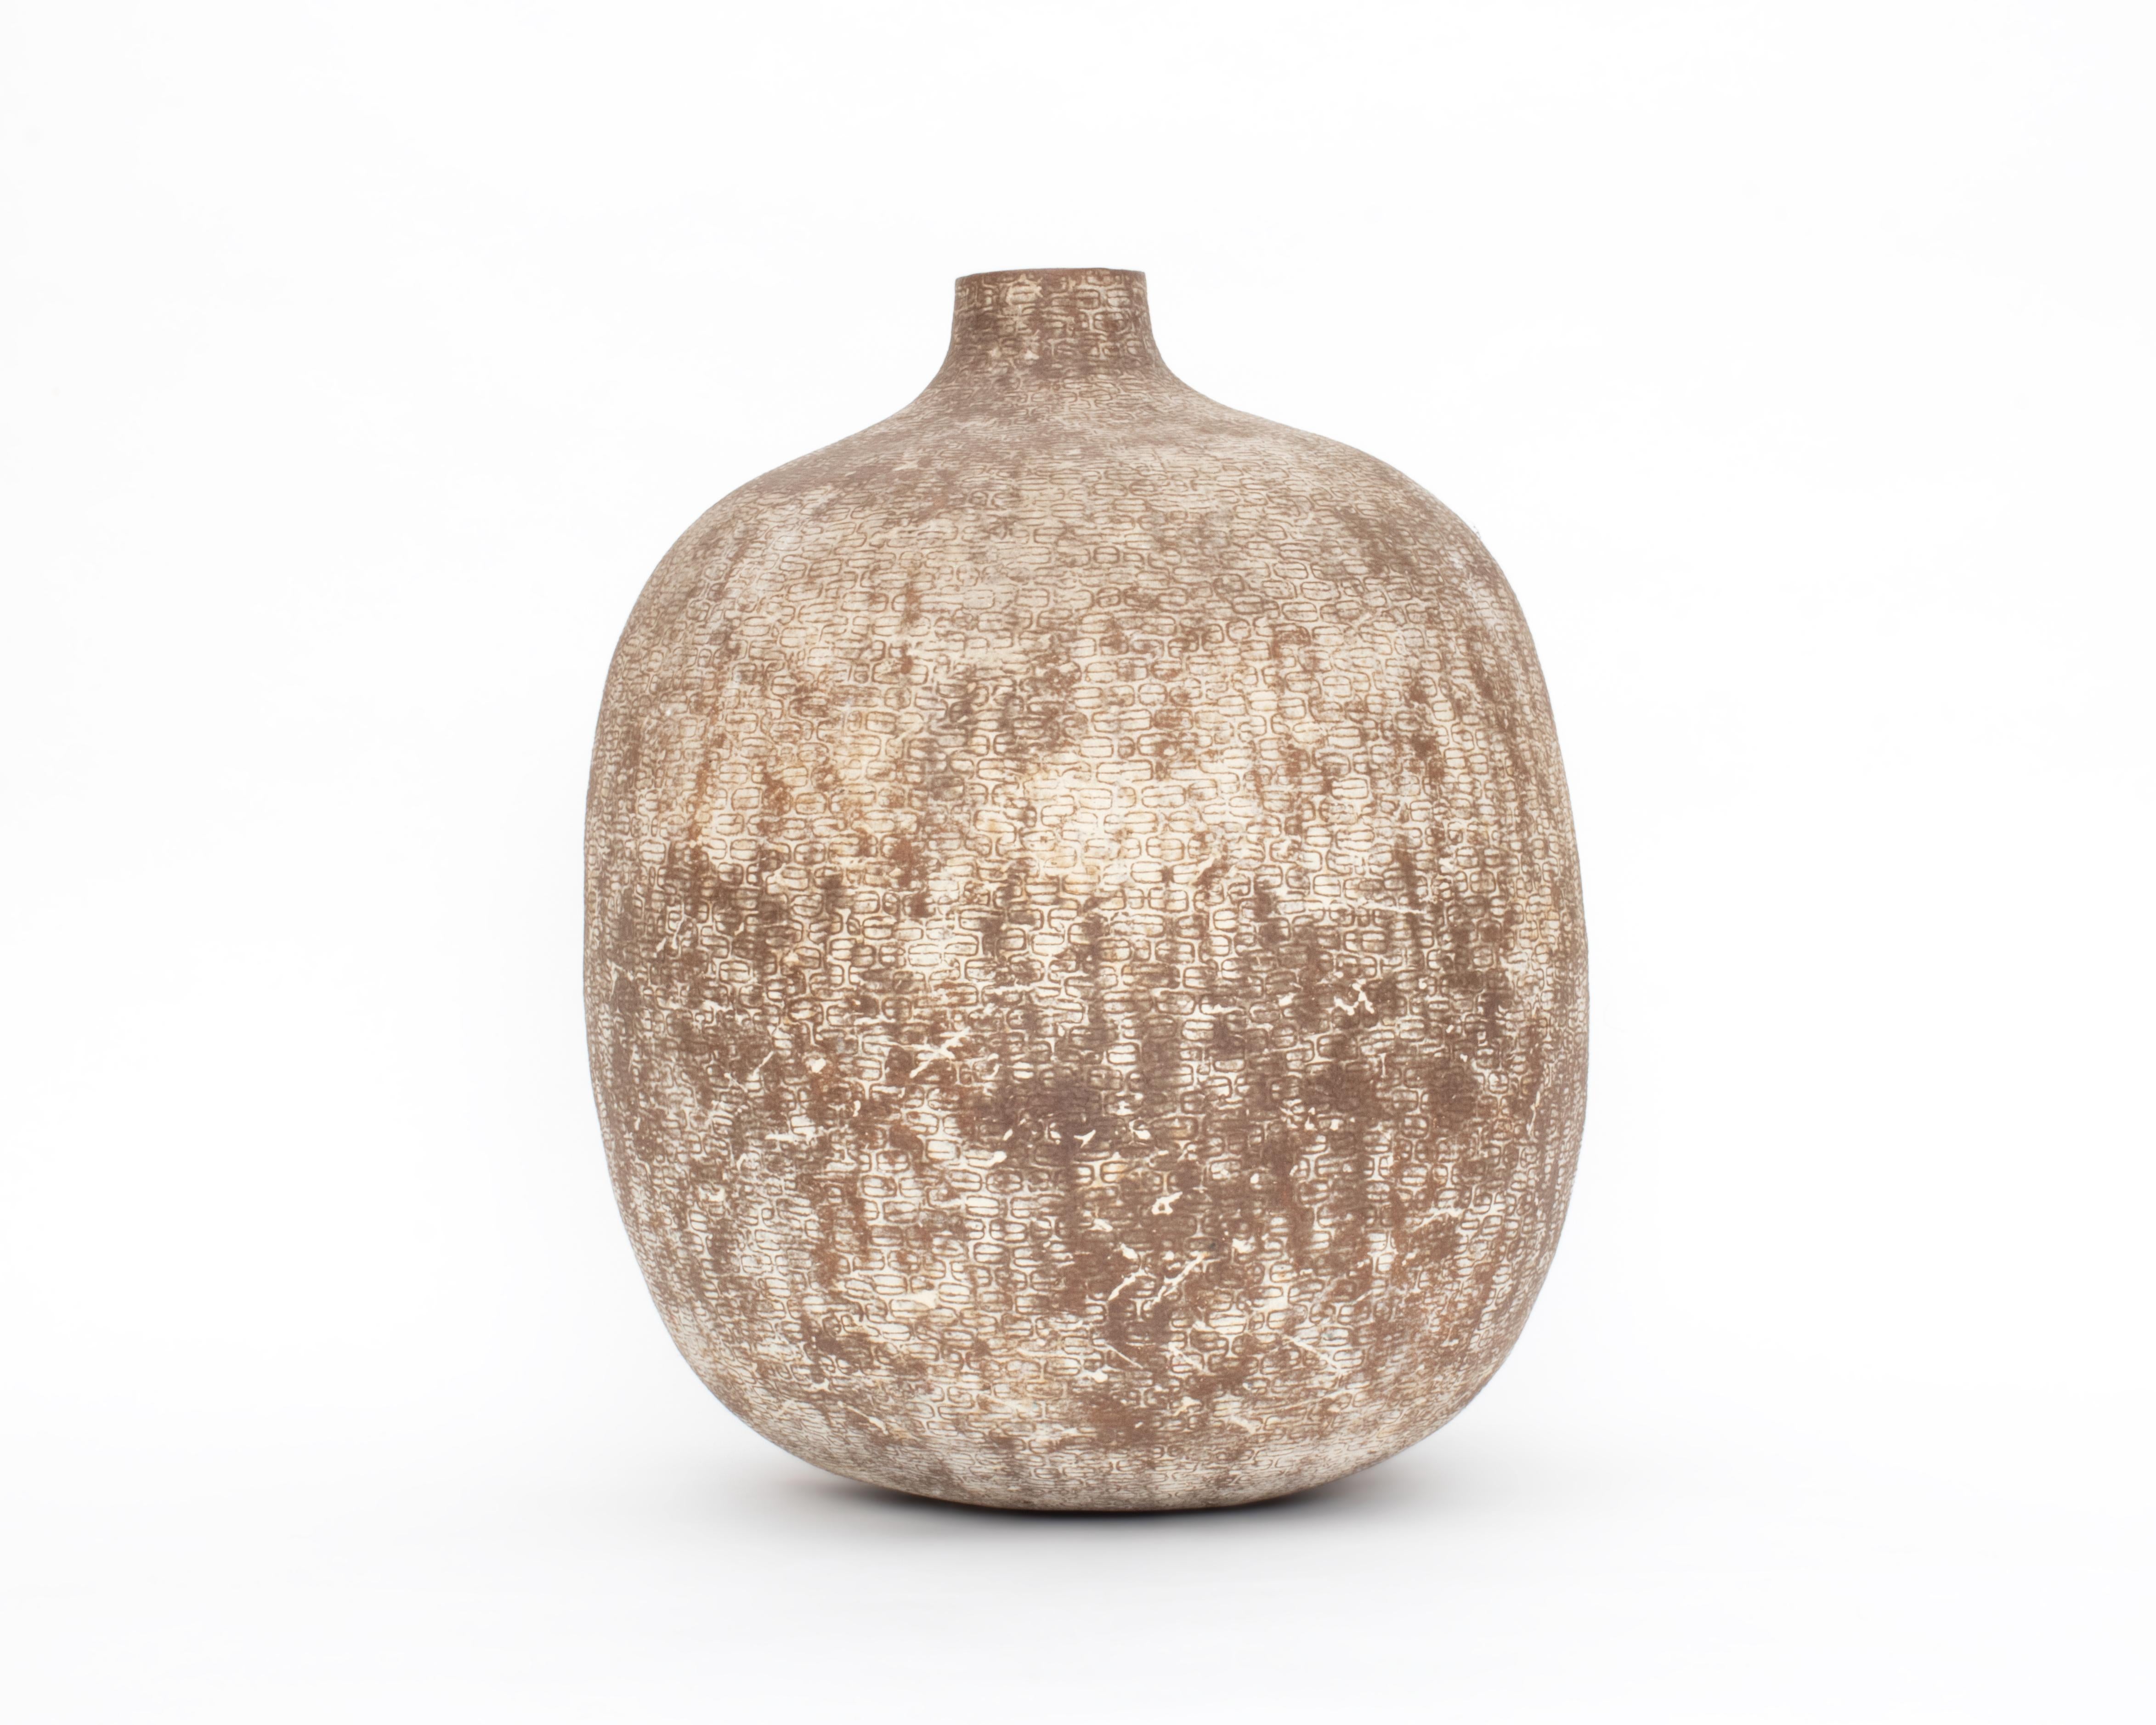 Here is a large stoneware vase by American artist, Claude Conover (1907 - 1994). It measures approximately 18